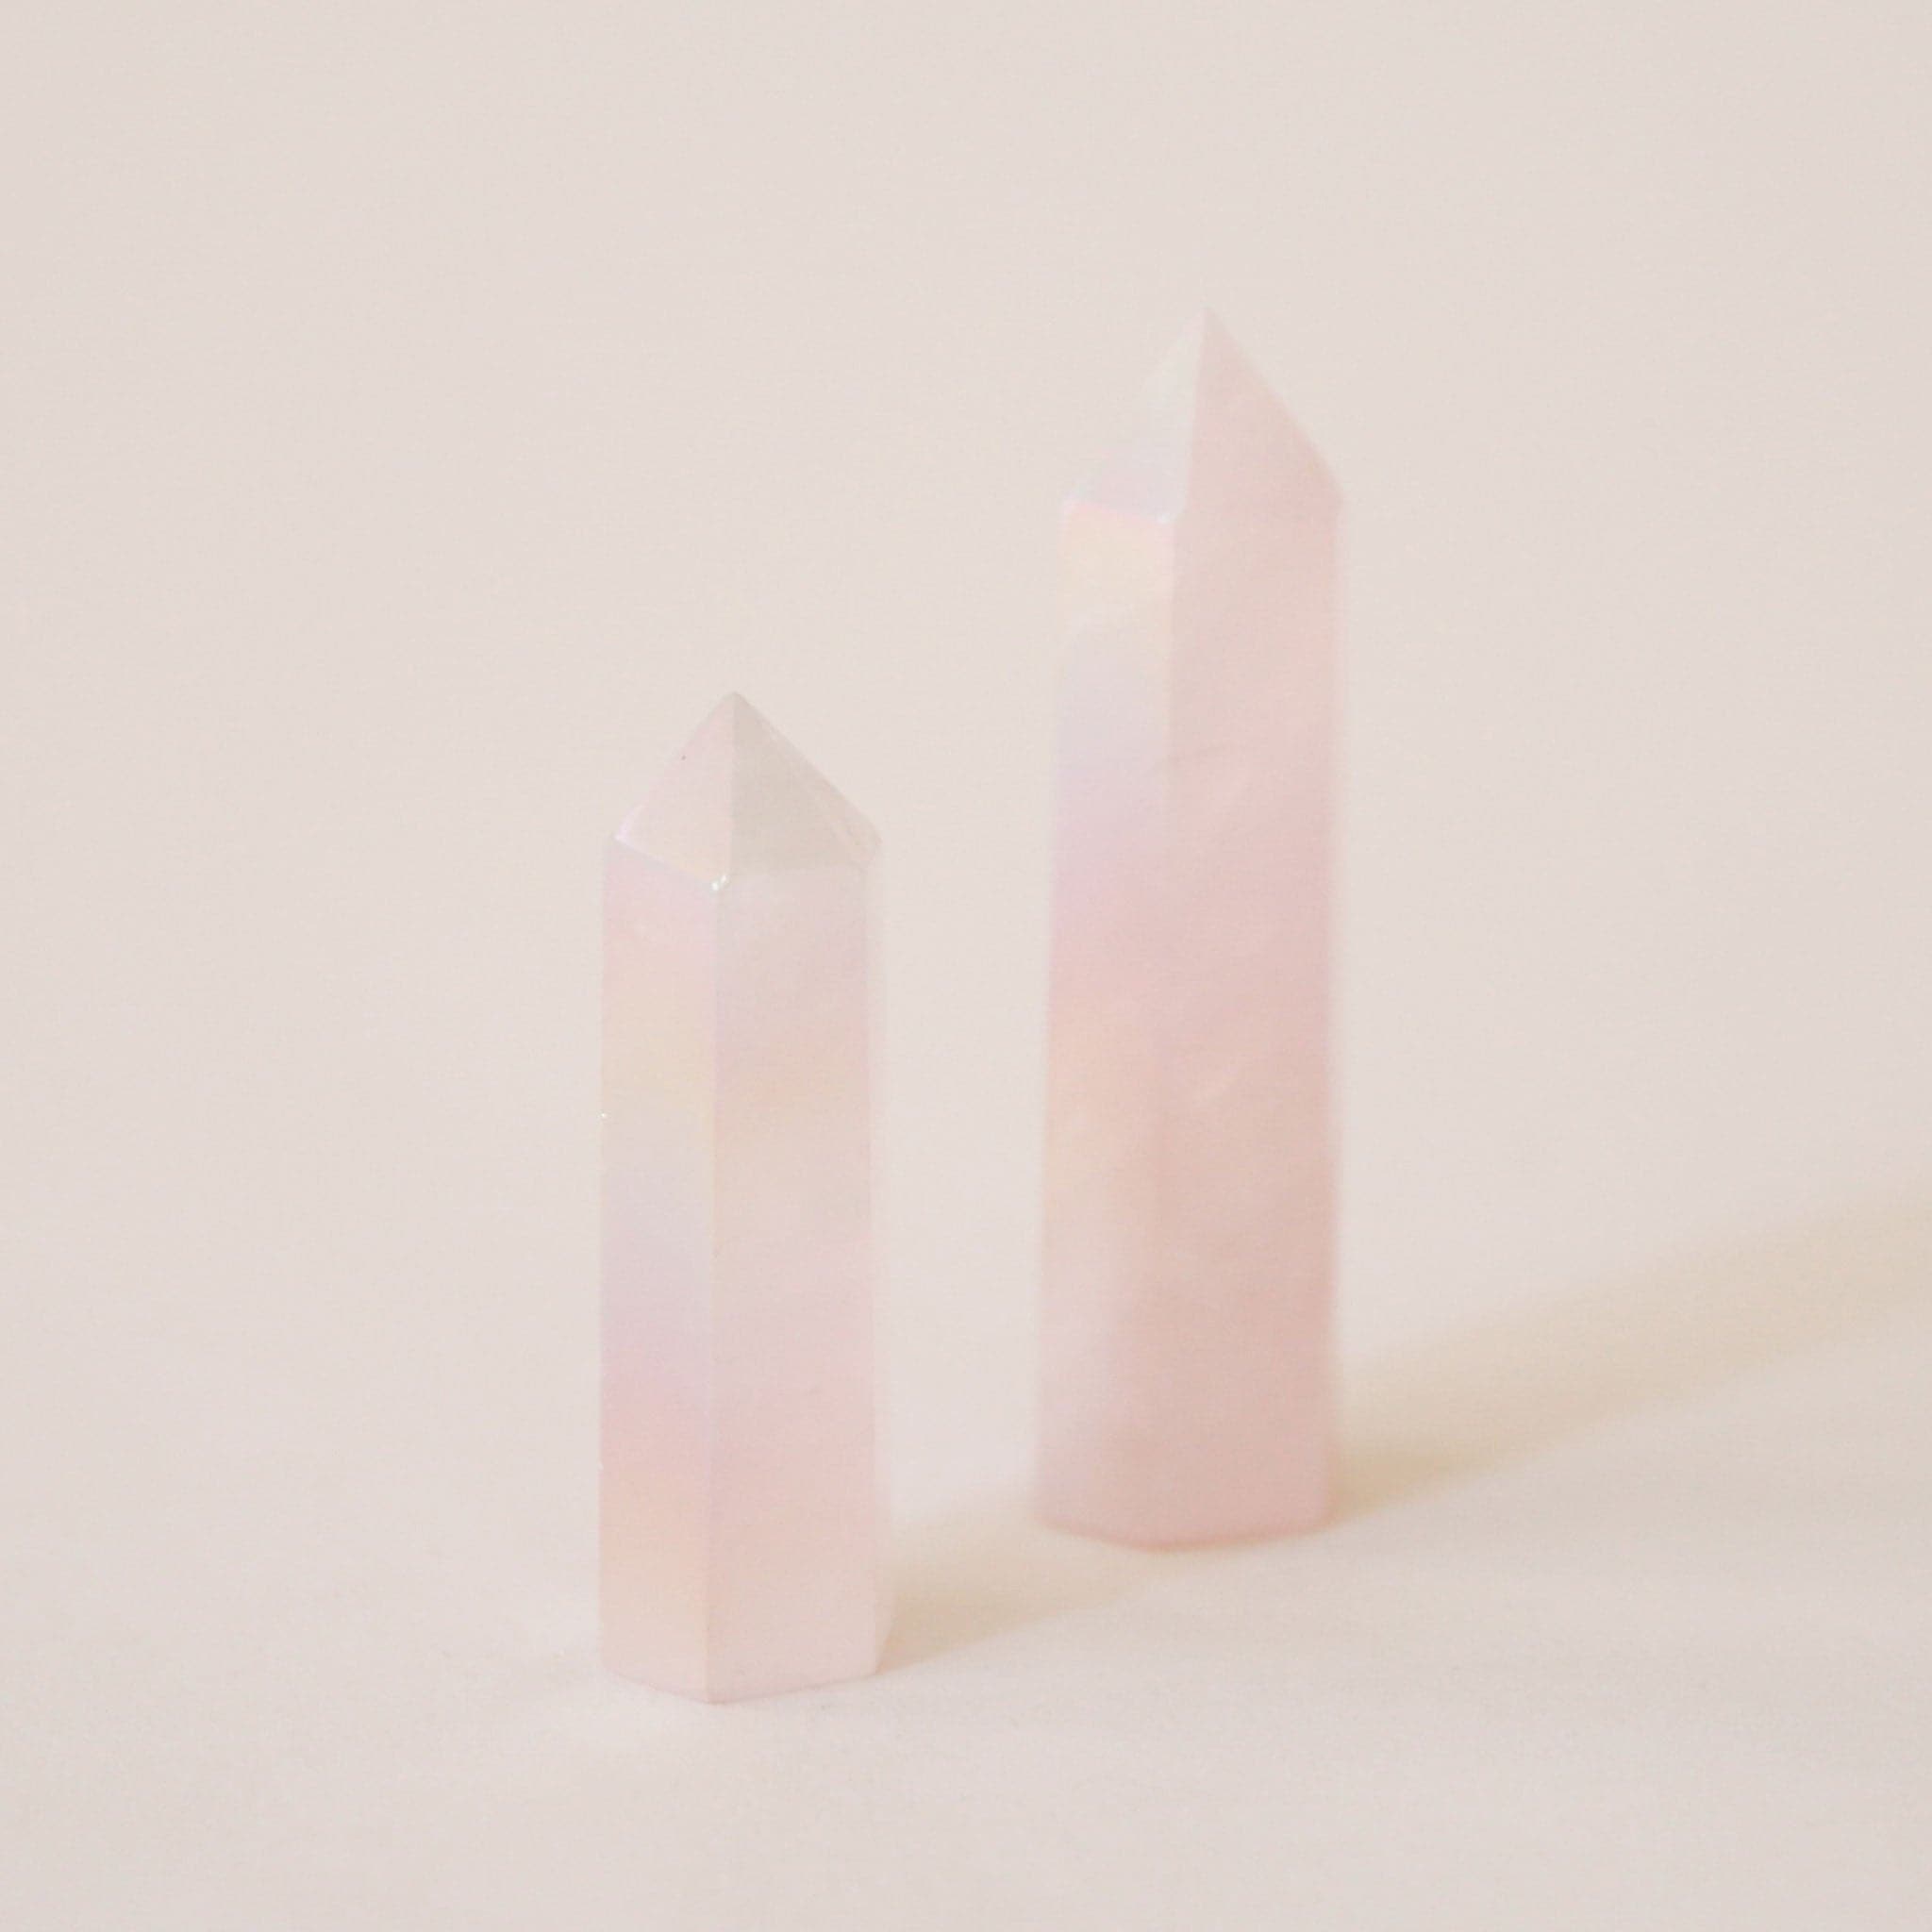 A rose quartz crystal with an iridescent quality to it.